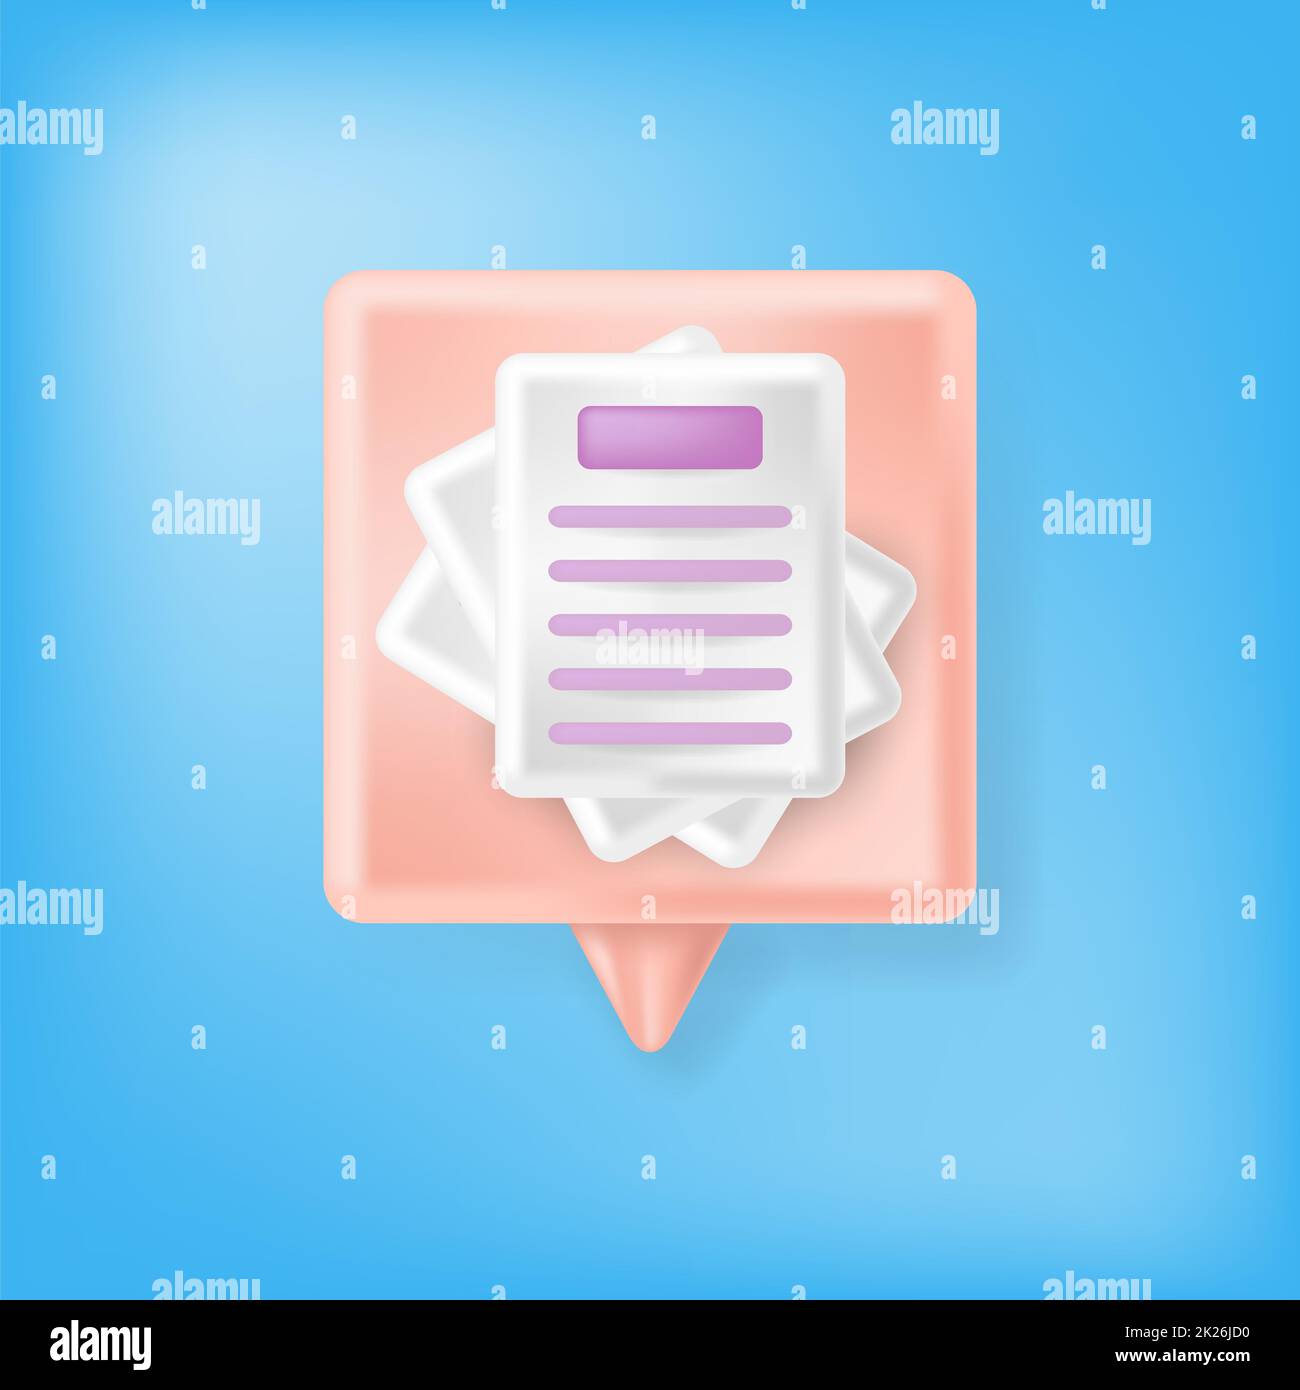 Paper Document Icon Icon and Orange Speech Bubble on Blurred Blue Background Stock Photo